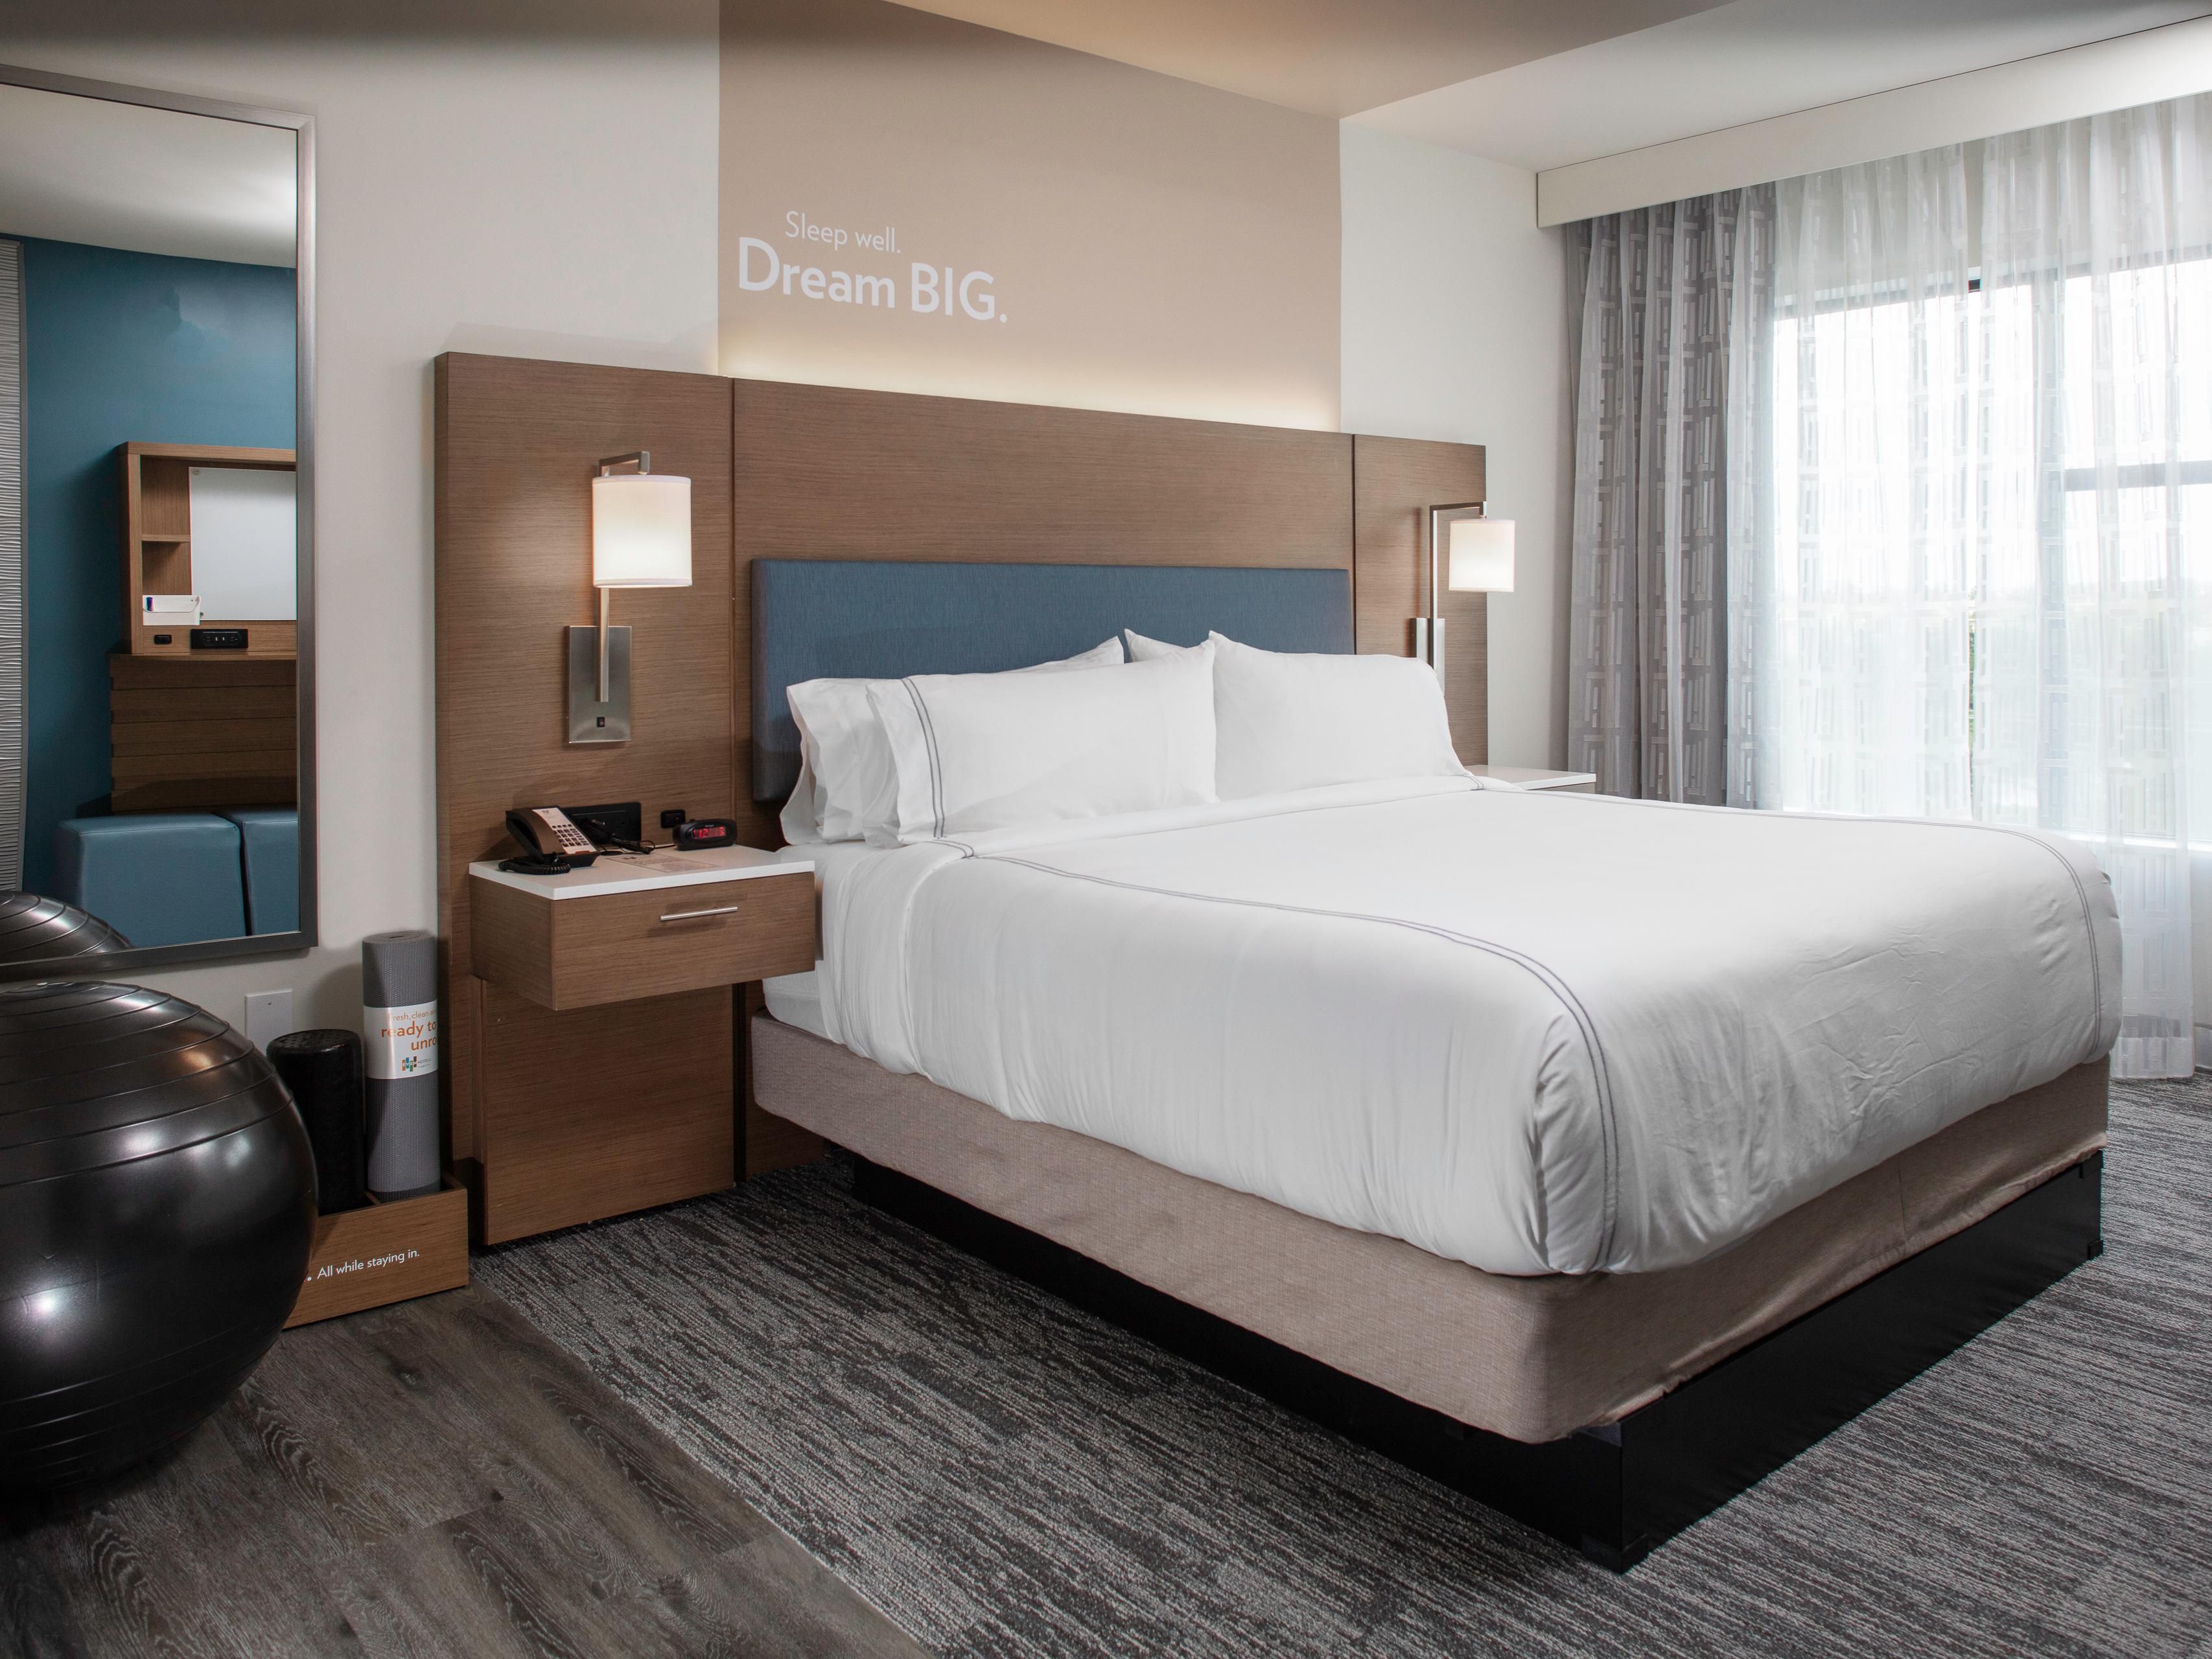 Each room of the hotel is designed with health and fitness in mind.  All rooms feature in-room exercise equipment, as well as on-demand training videos, and LED mood lighting to enhance rest and productivity. Free high-speed Wi-Fi will keep you connected so you can get the most out of both work and play.
